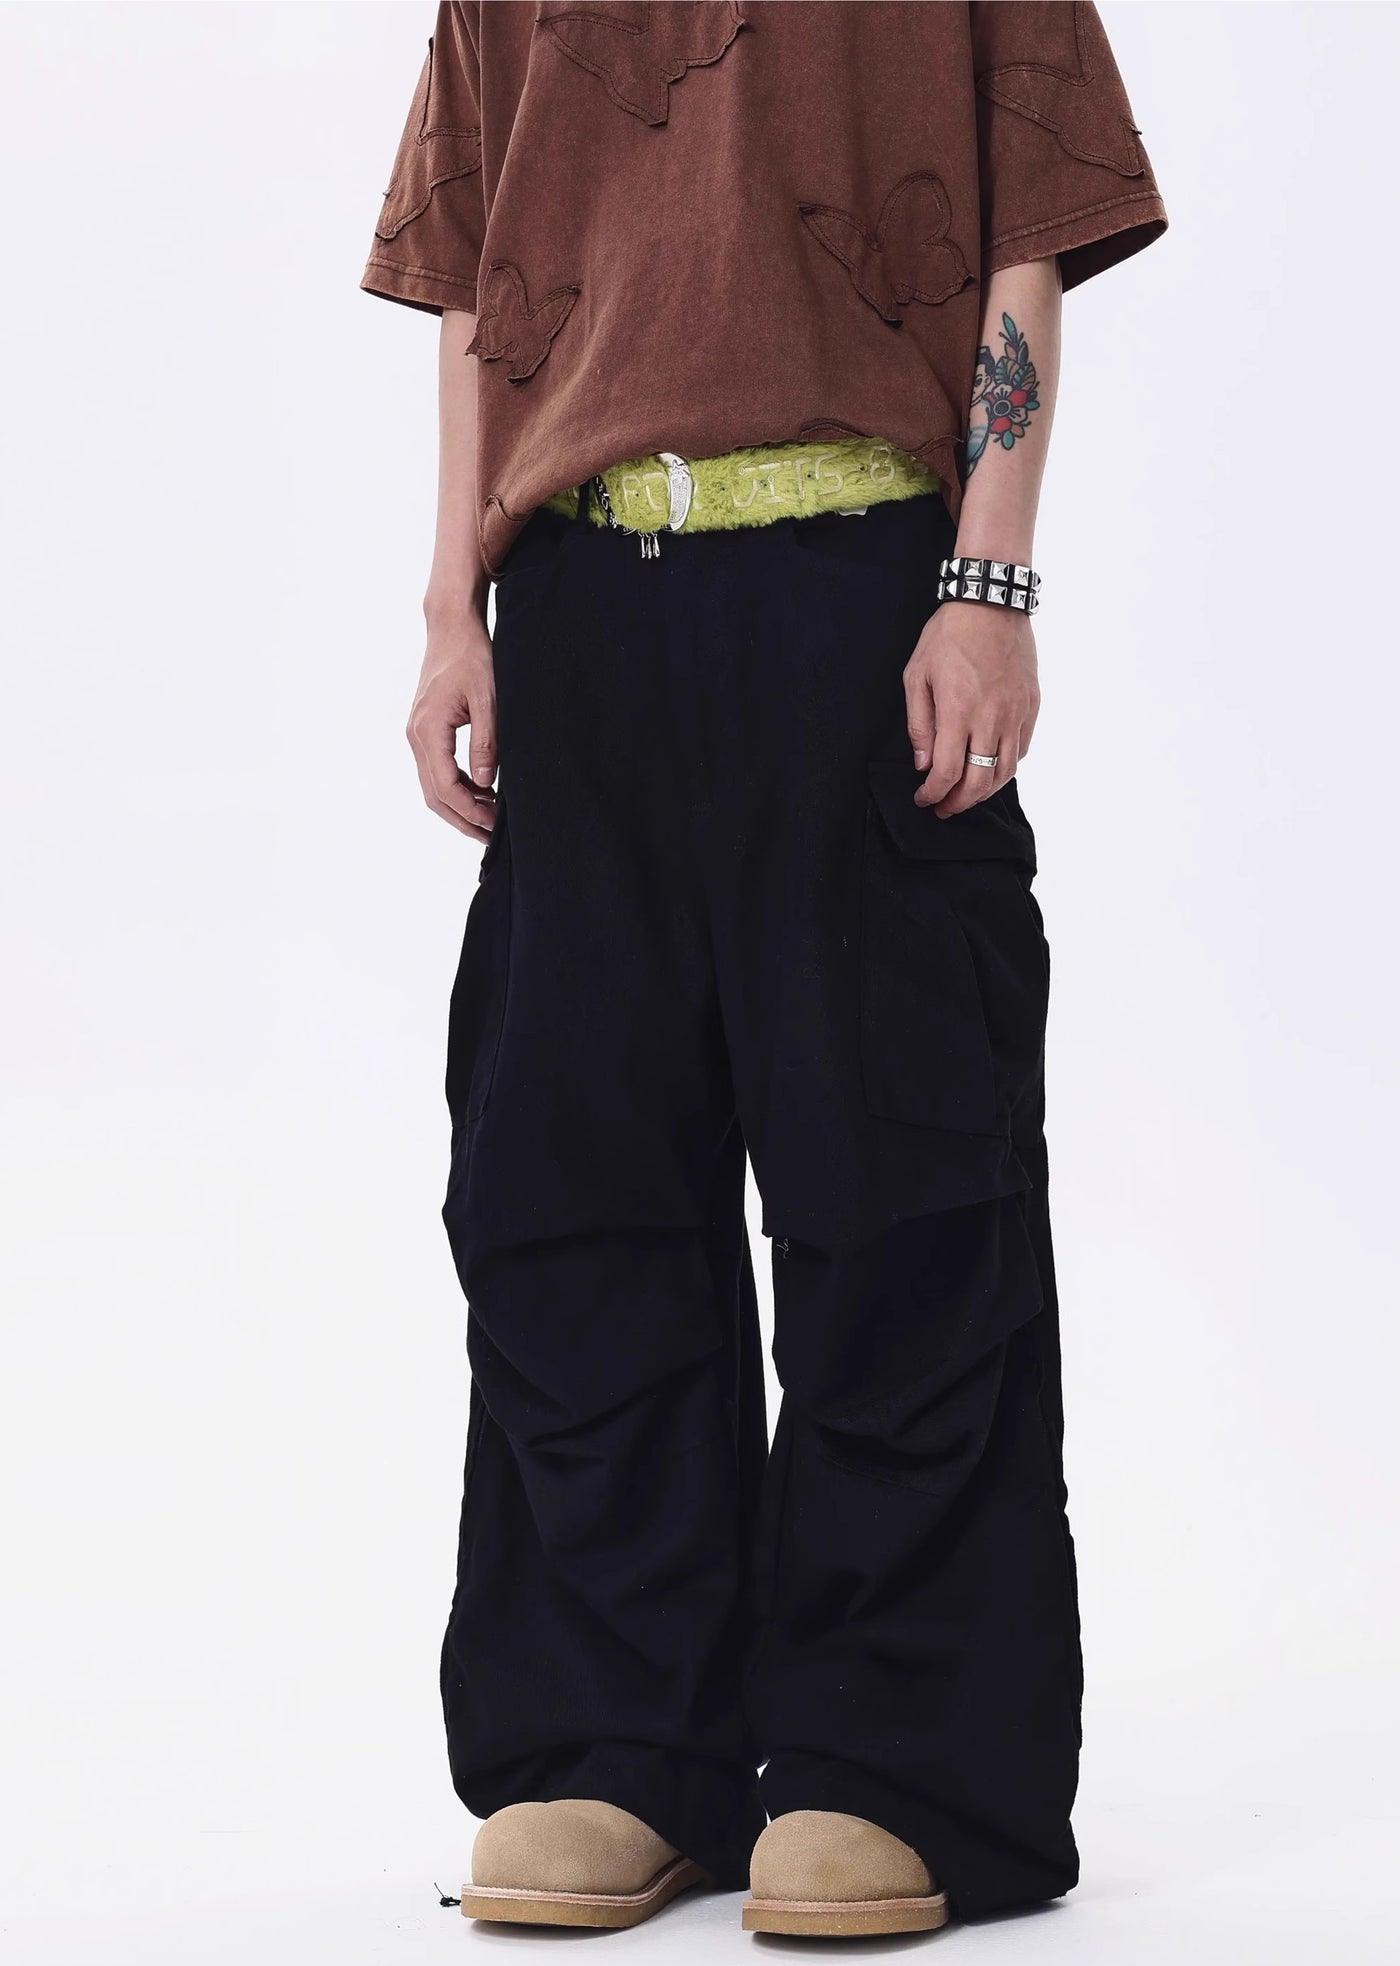 [BTSG] Simple cargo-rise pants with a relaxed silhouette design pants BS0020